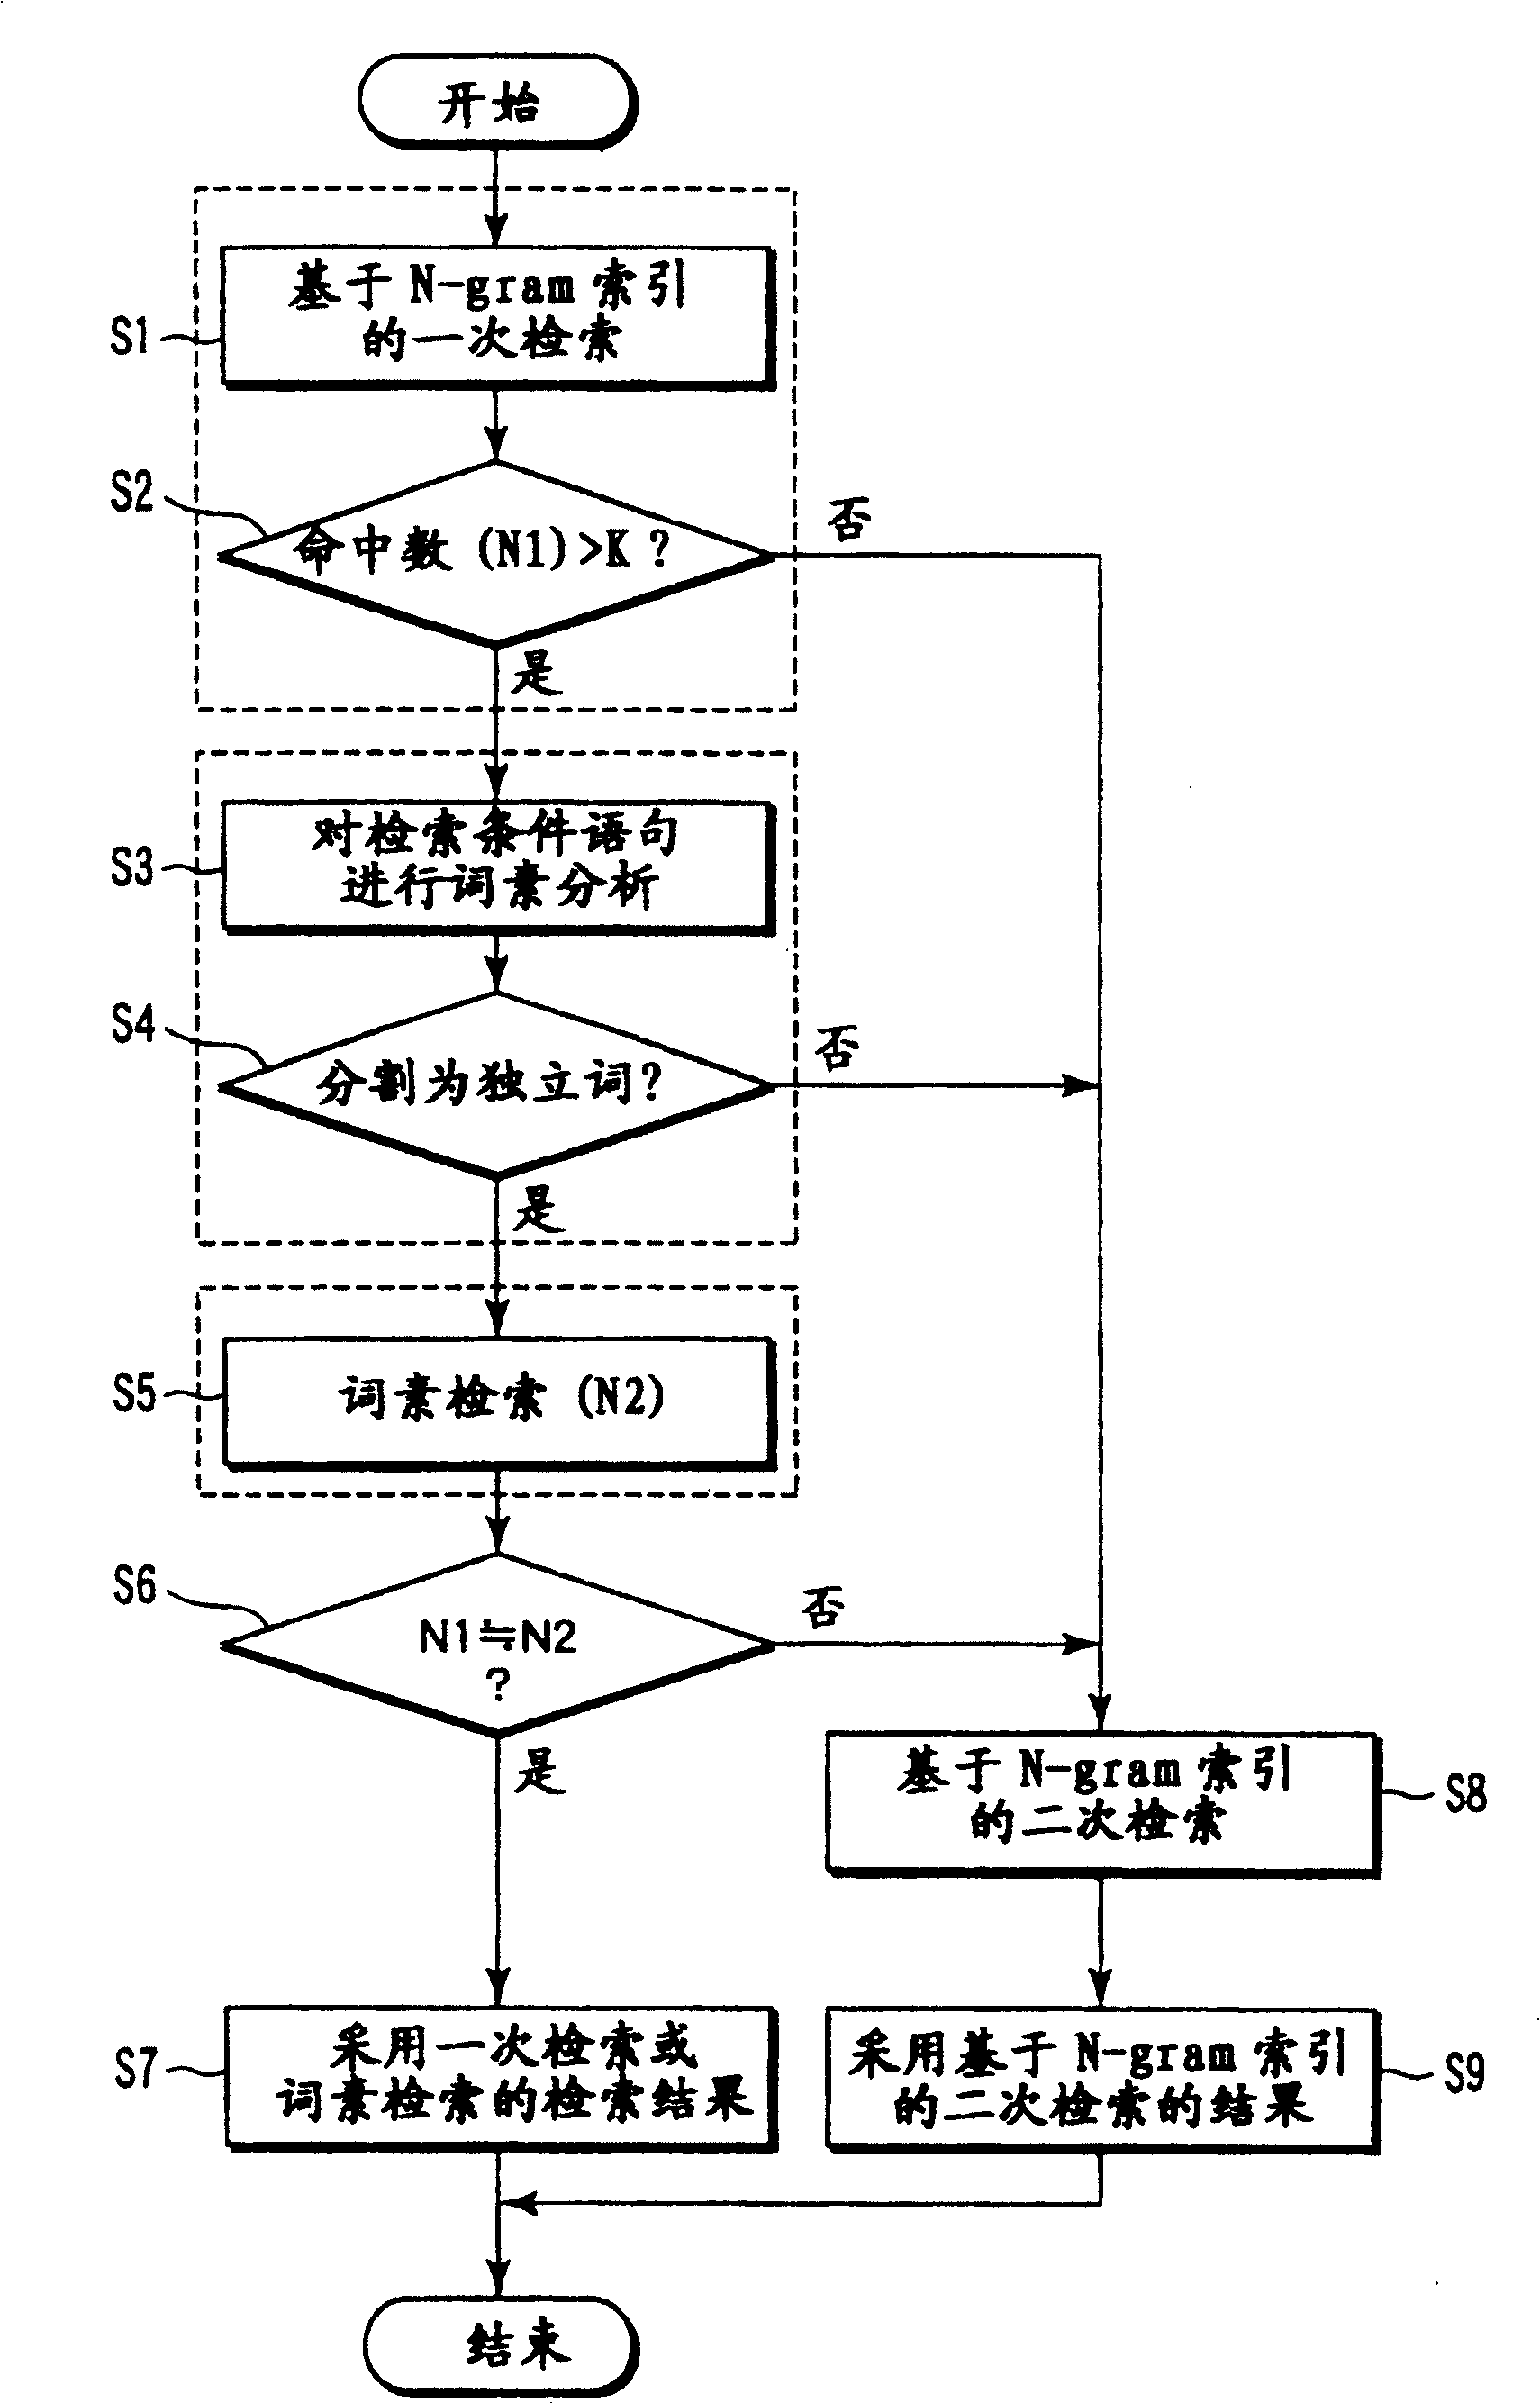 Full-text retrieval system and method